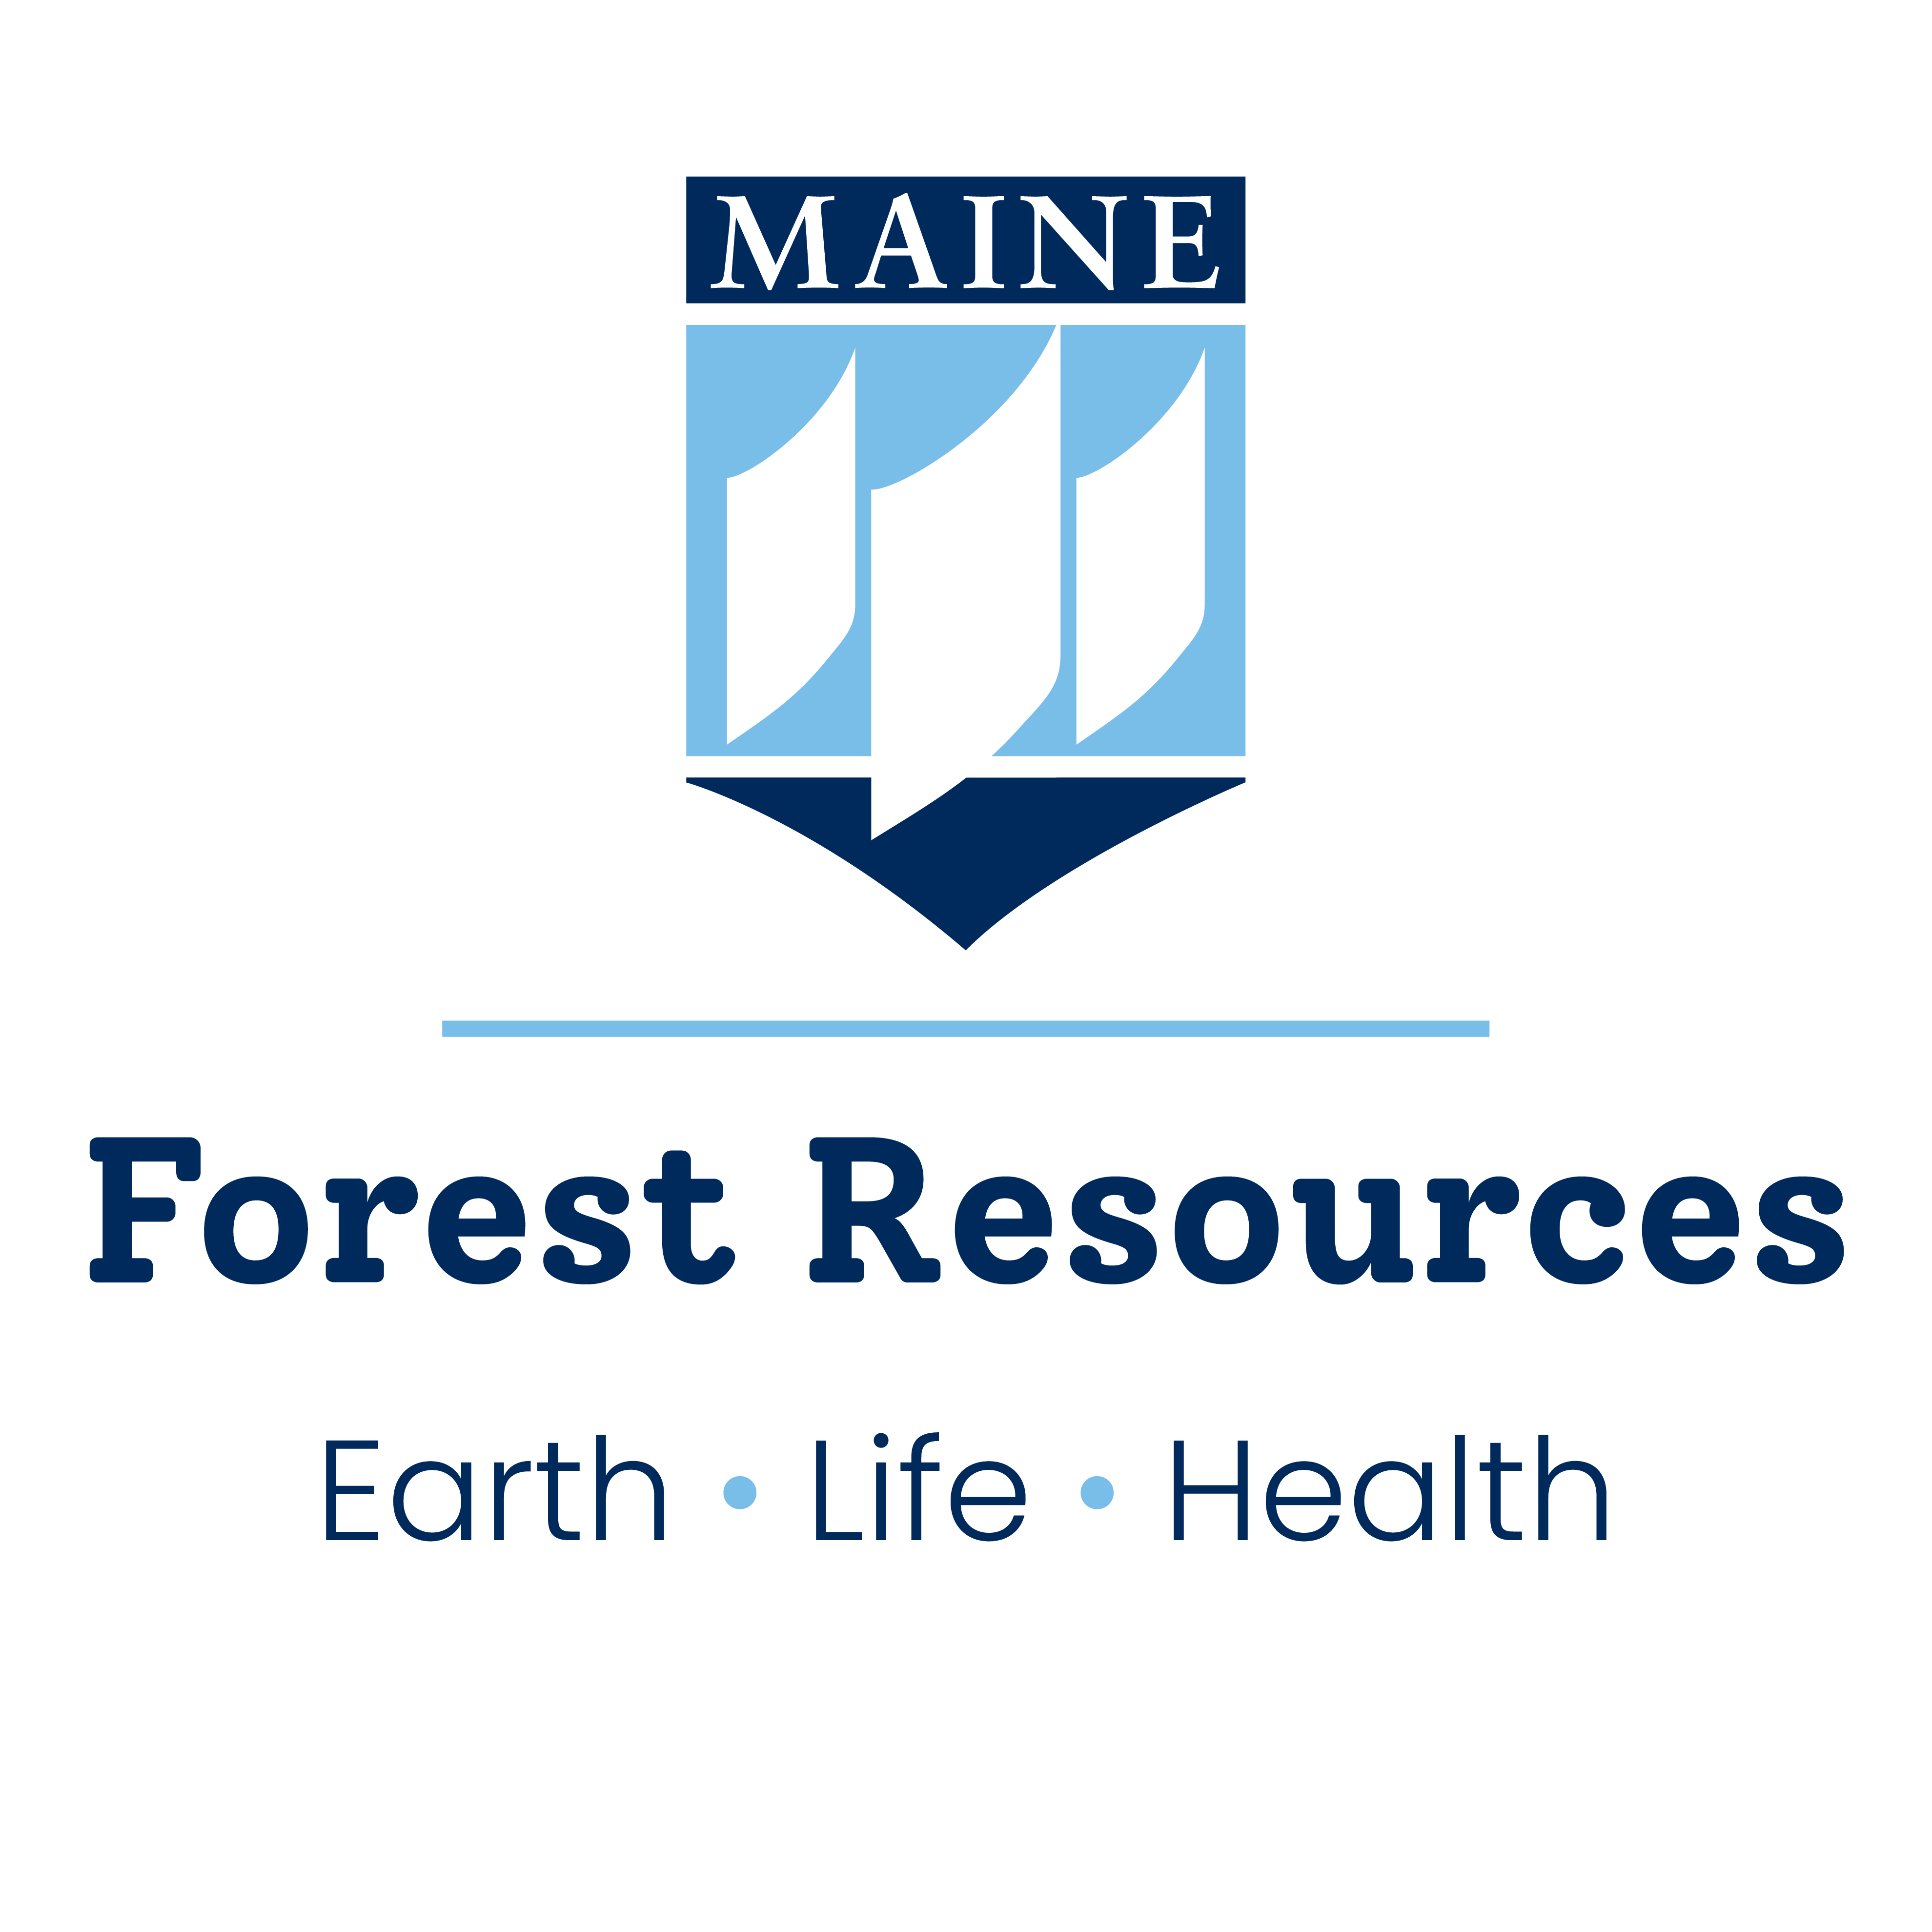 UMaine crest, forest resources, earth • life • health